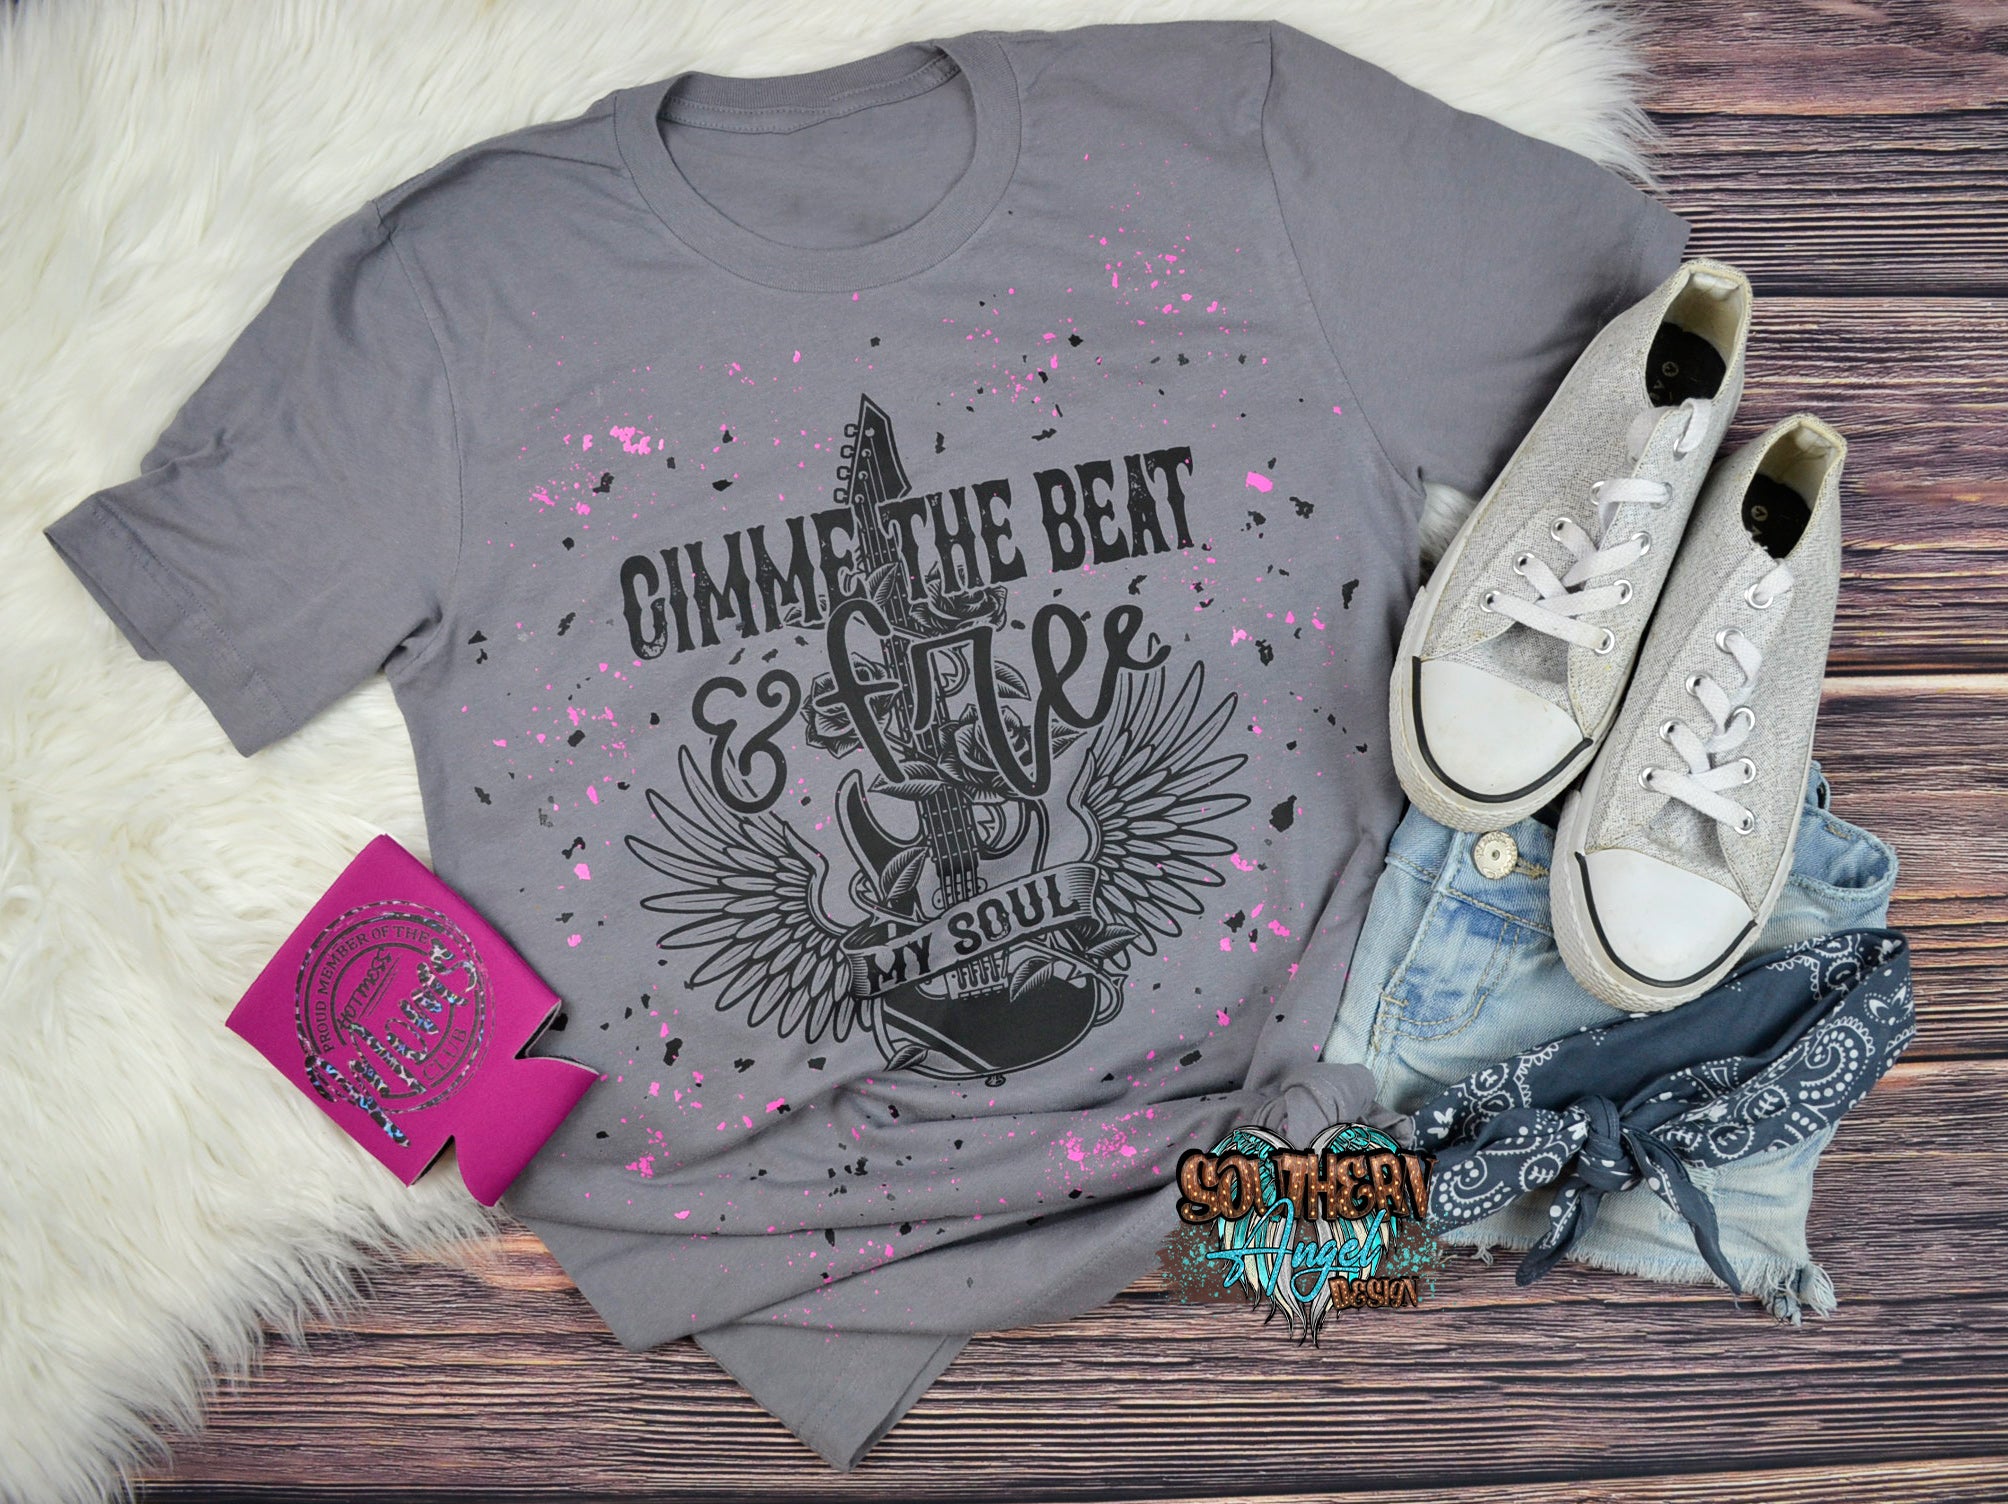 Light Slate Gray Gimme The Beat confetti t-shirt image_e41431c2-3195-45e2-b81c-8e71bd757f98.jpg gimme-the-beat Concert & Rodeo